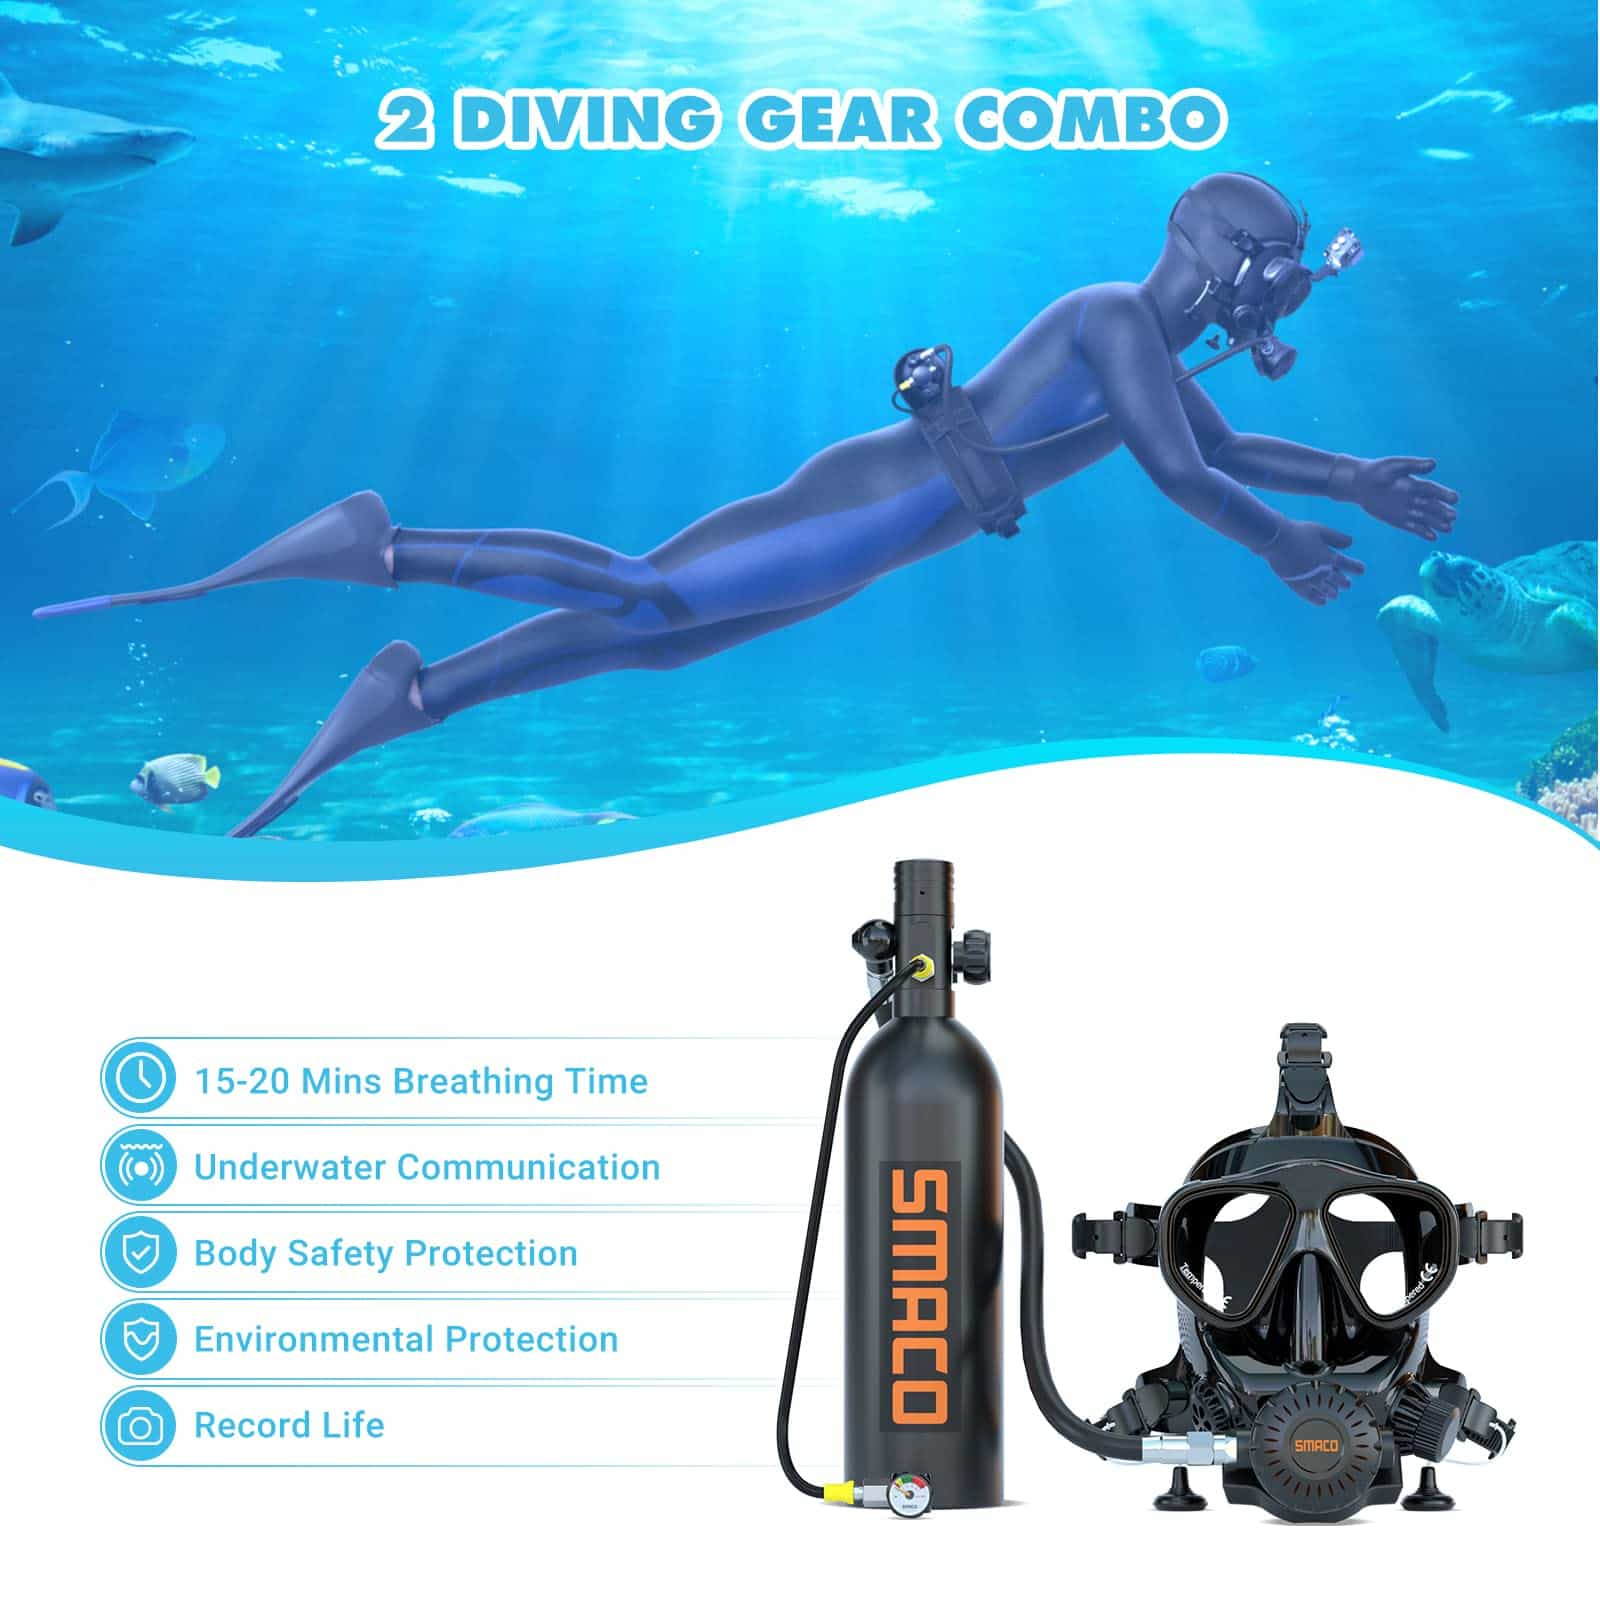 Mini Scuba Tanks – How Safe Are They? – Diving Info